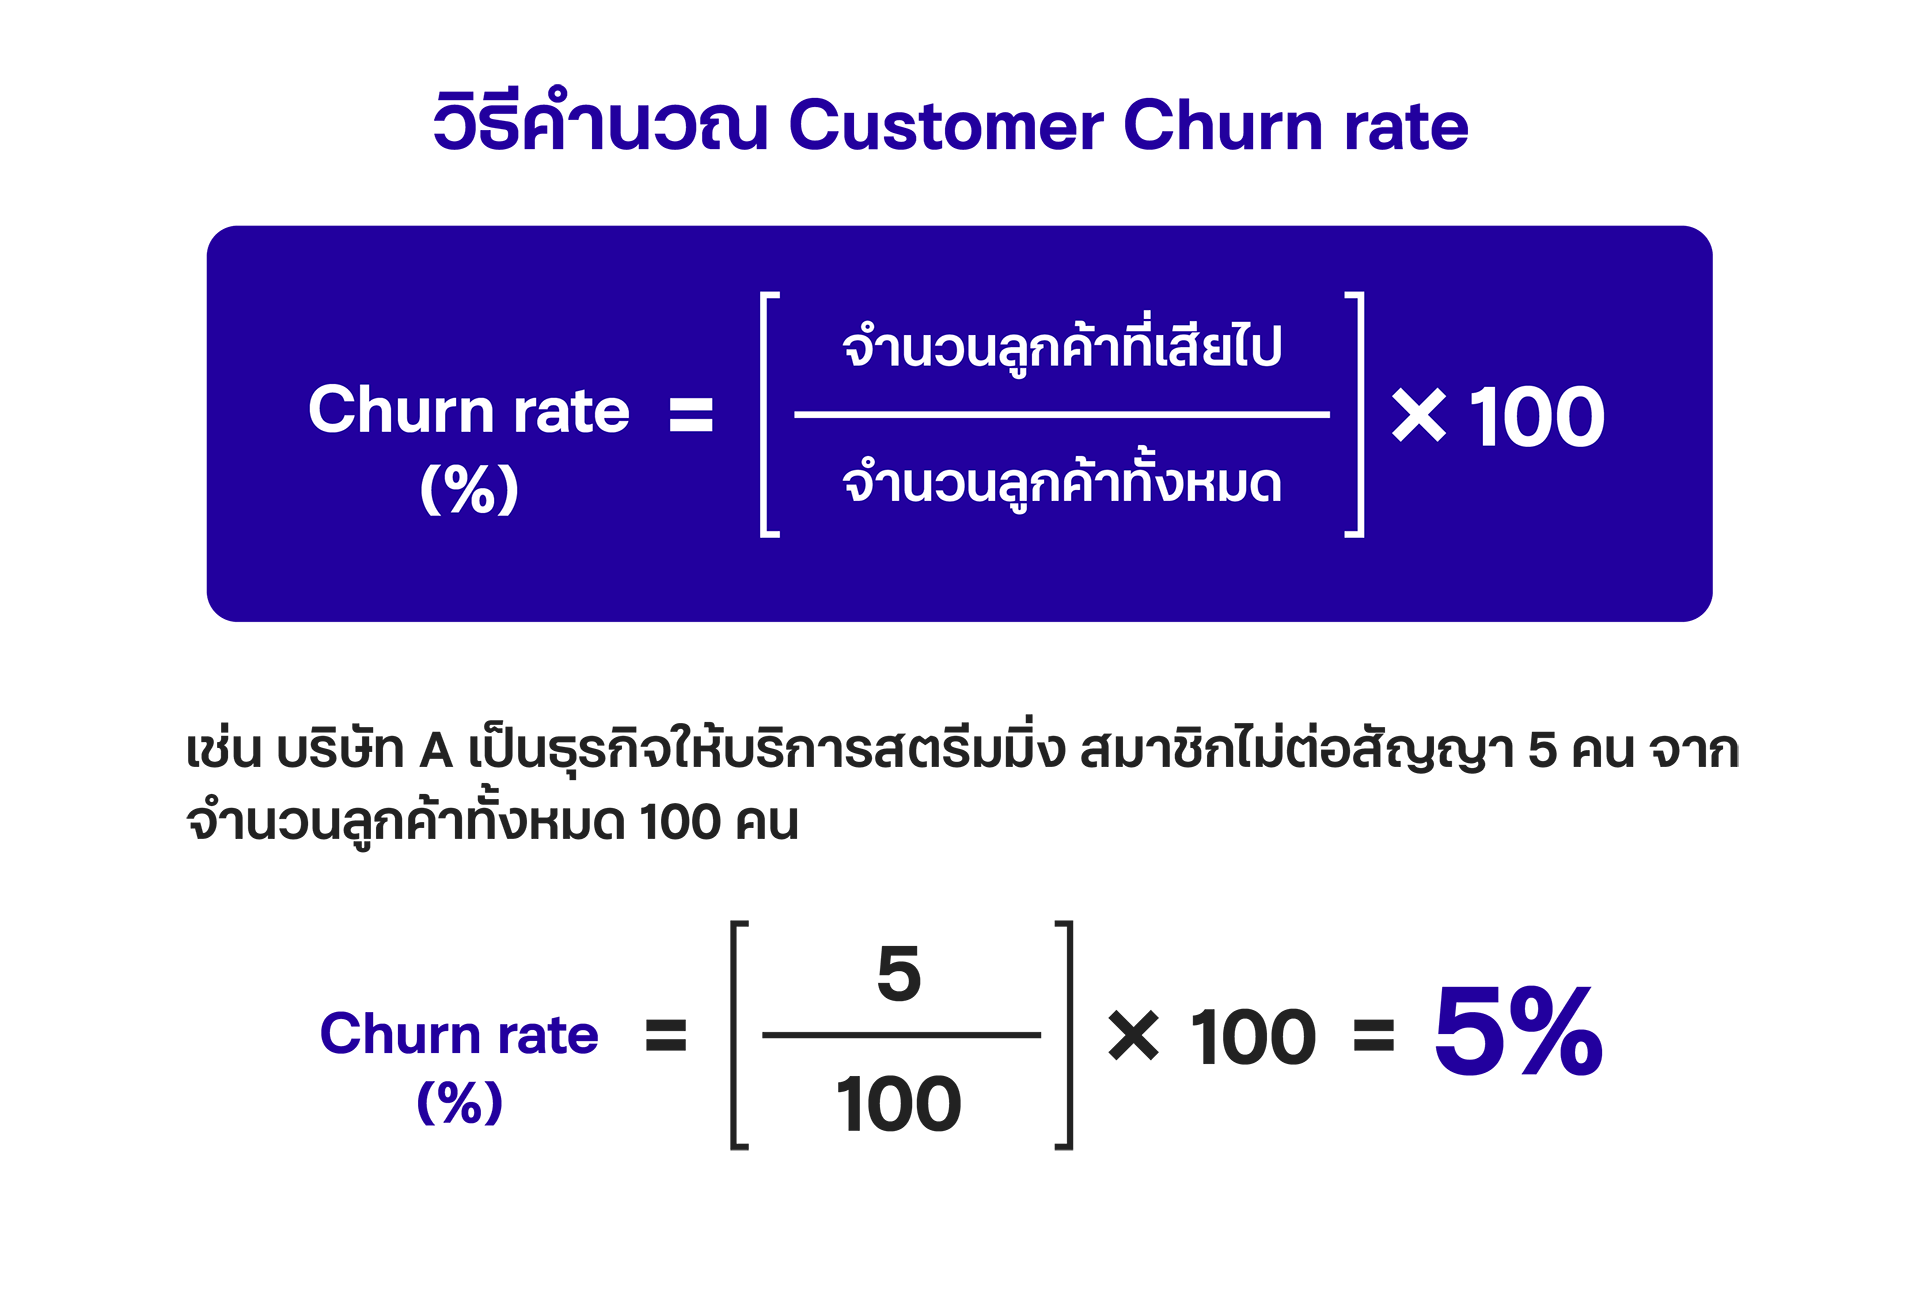 How to calcurate churn rate